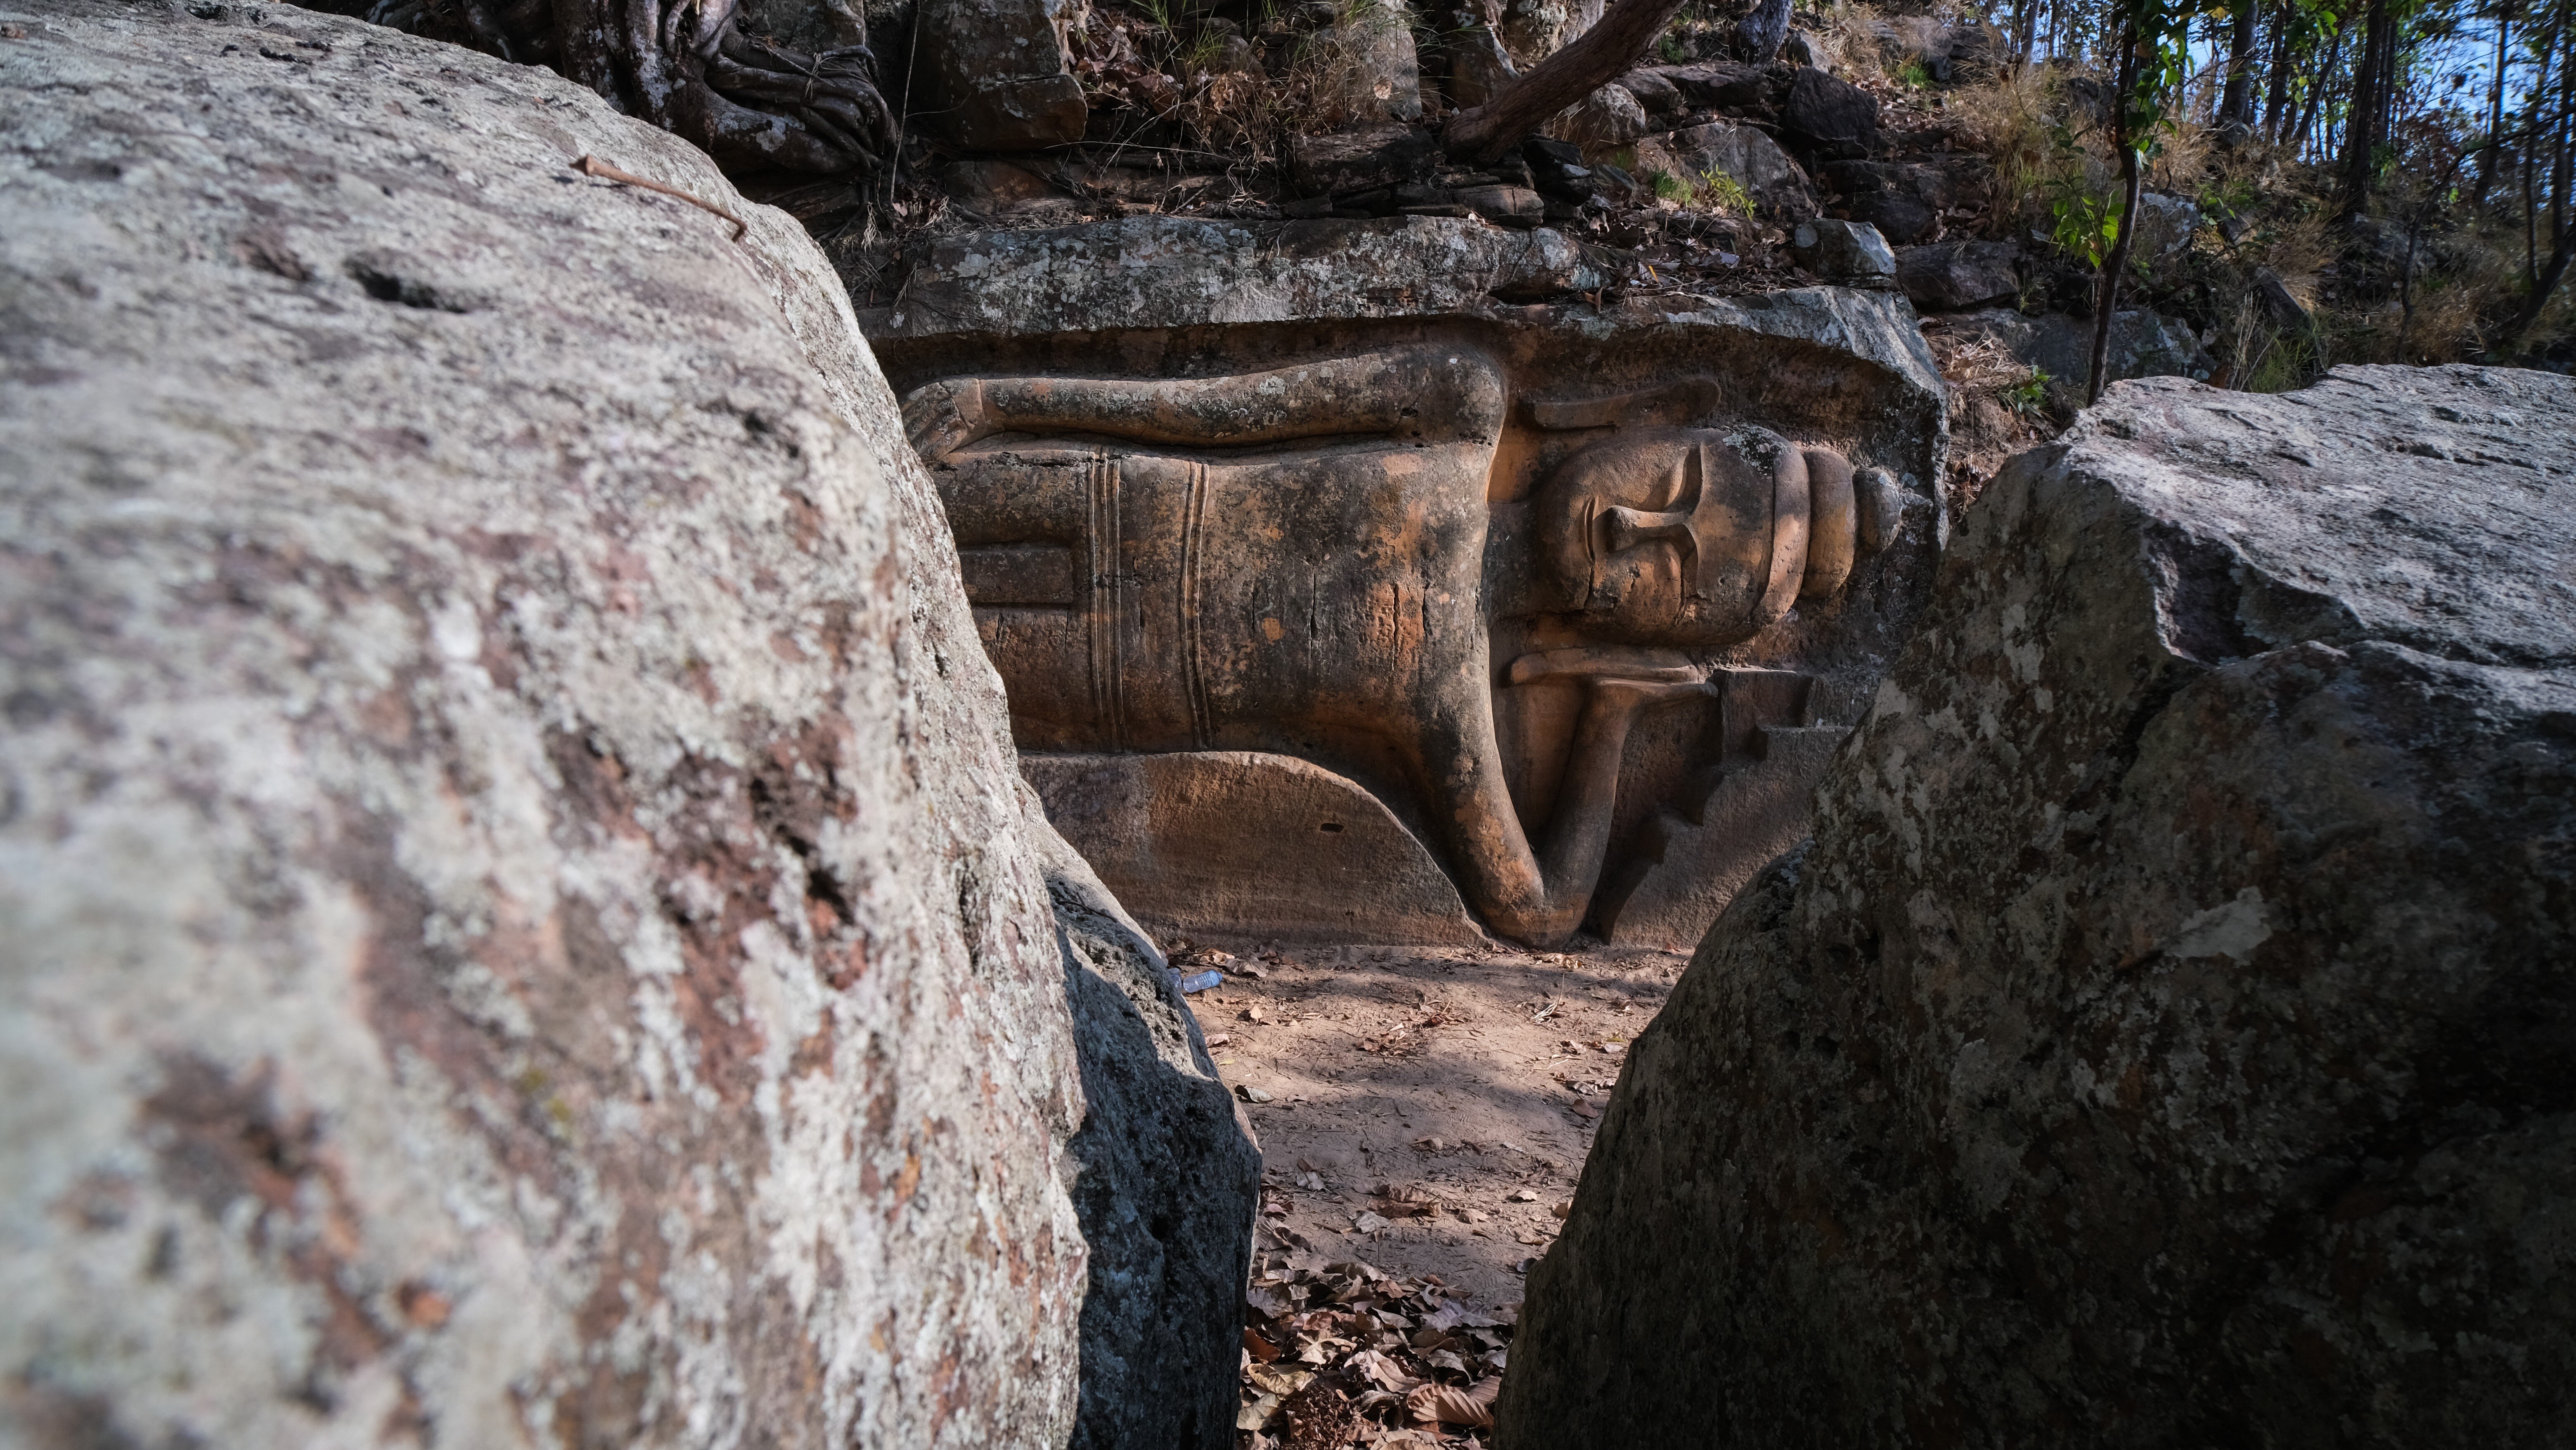 A newly discovered 6m-long Buddhist carving on Kangva hill in Pursat province, Cambodia. Photo: Peter Ford